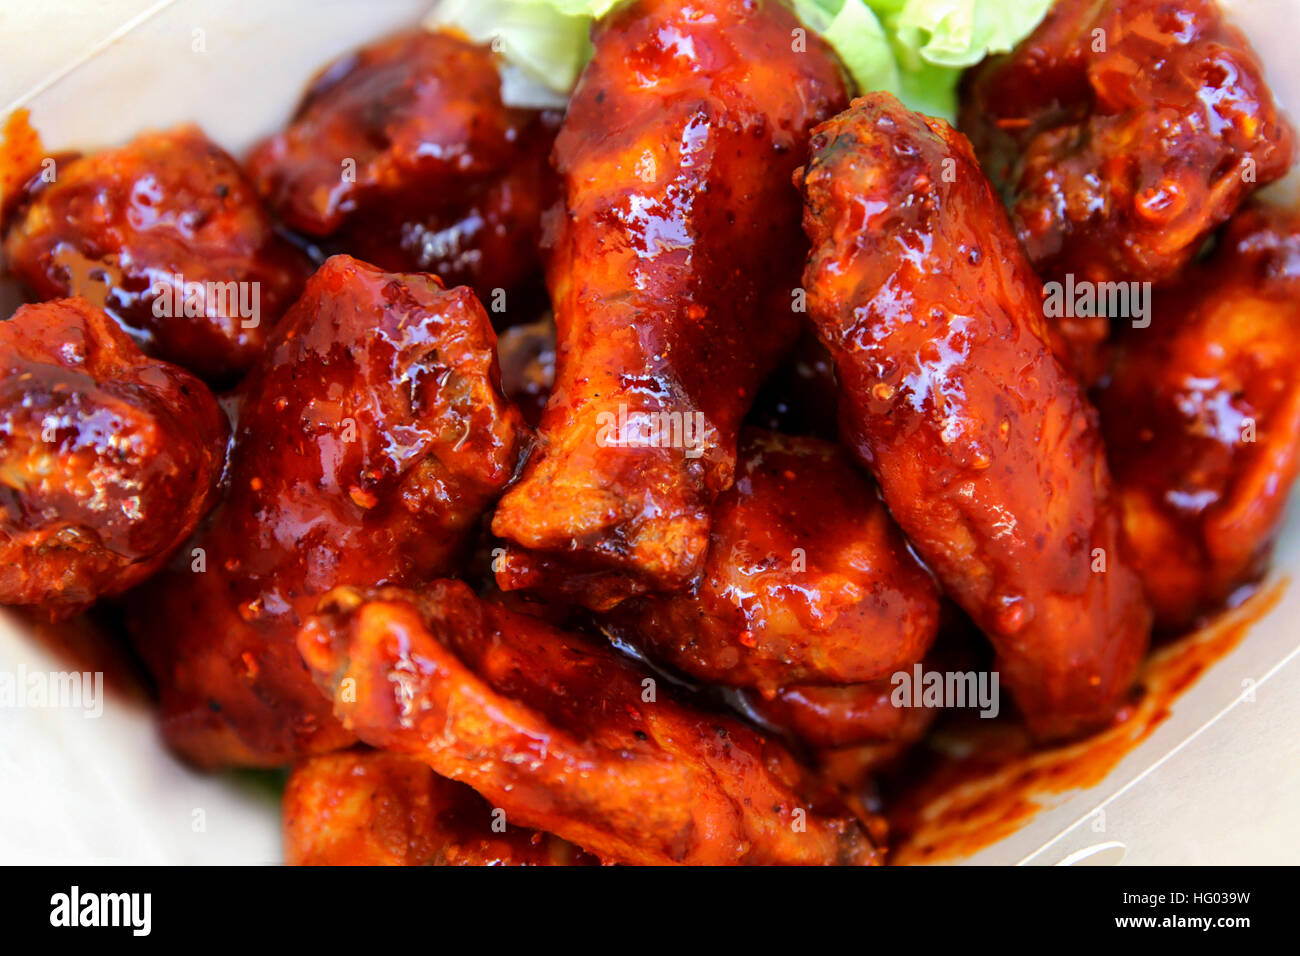 barbecued chicken wings, Take away fast food Stock Photo